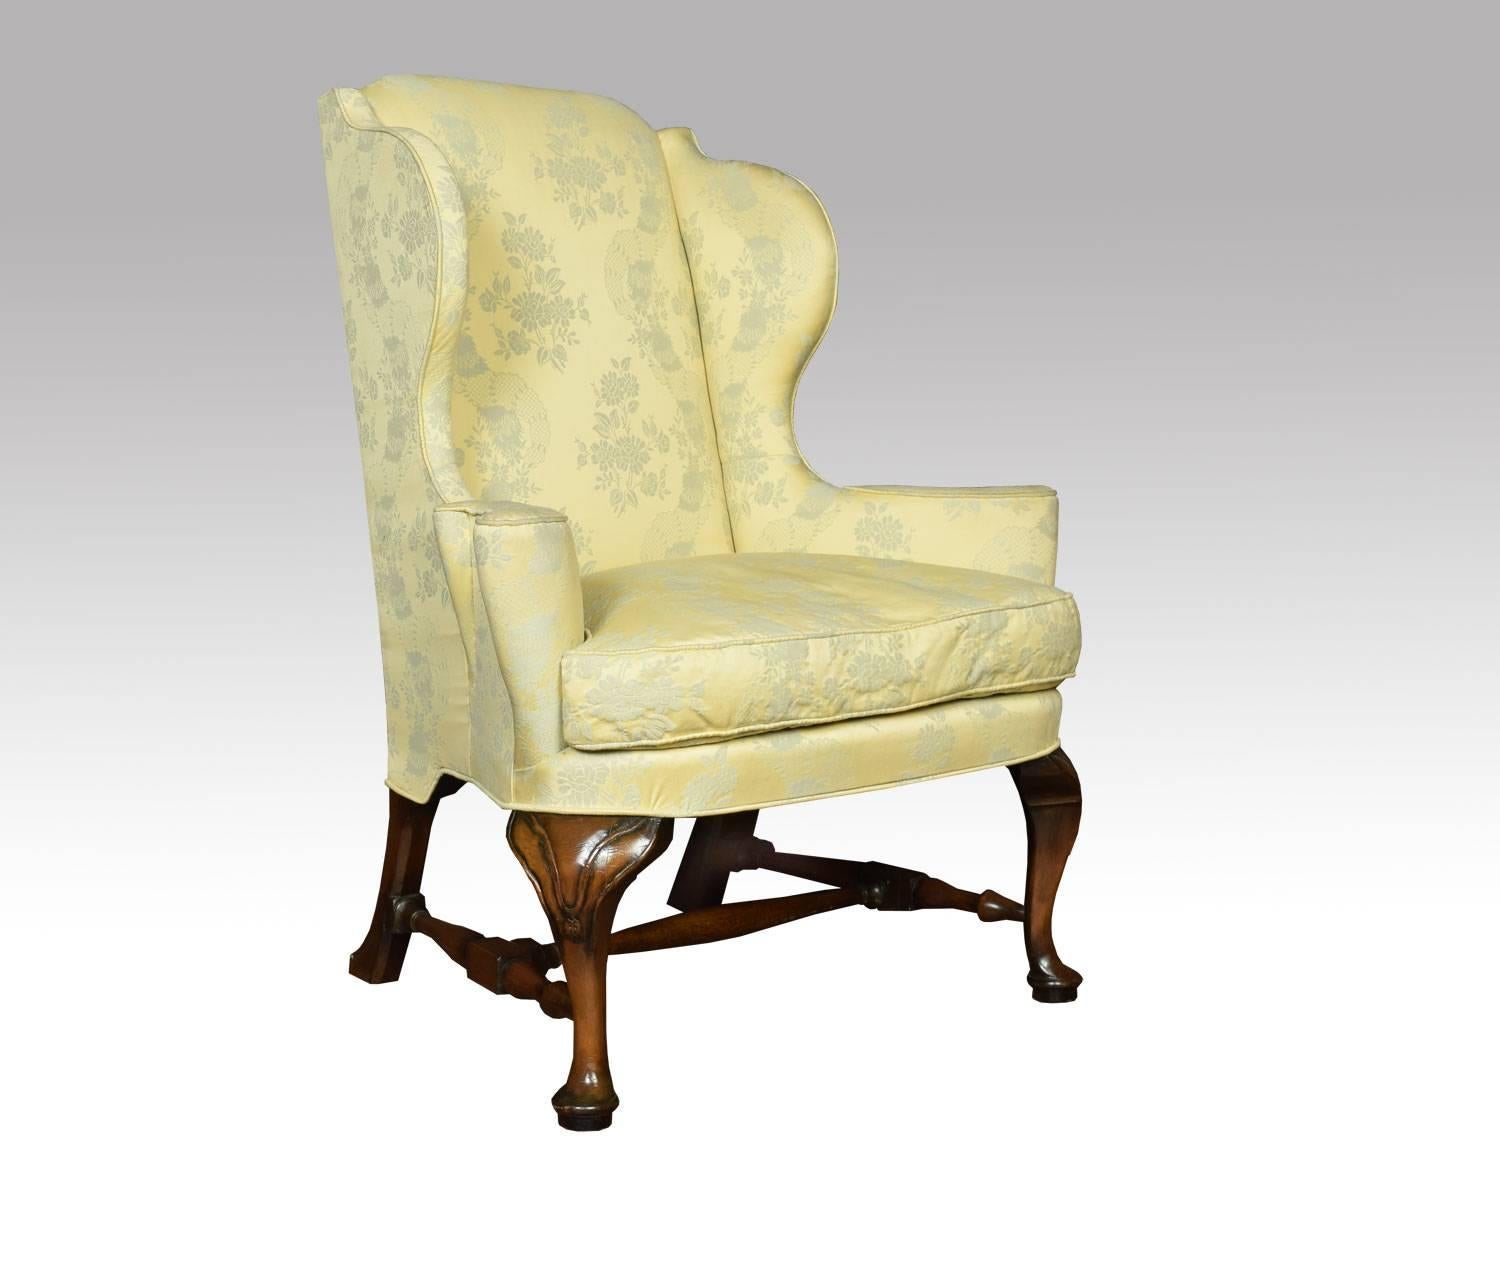 Early 20th century Queen Anne style wing armchair having walnut front carved cabriole legs, with swept legs to the rear united by stretcher. The wing armchair upholstered in damask upholstery having removable cushion.

Dimensions:

Height 44